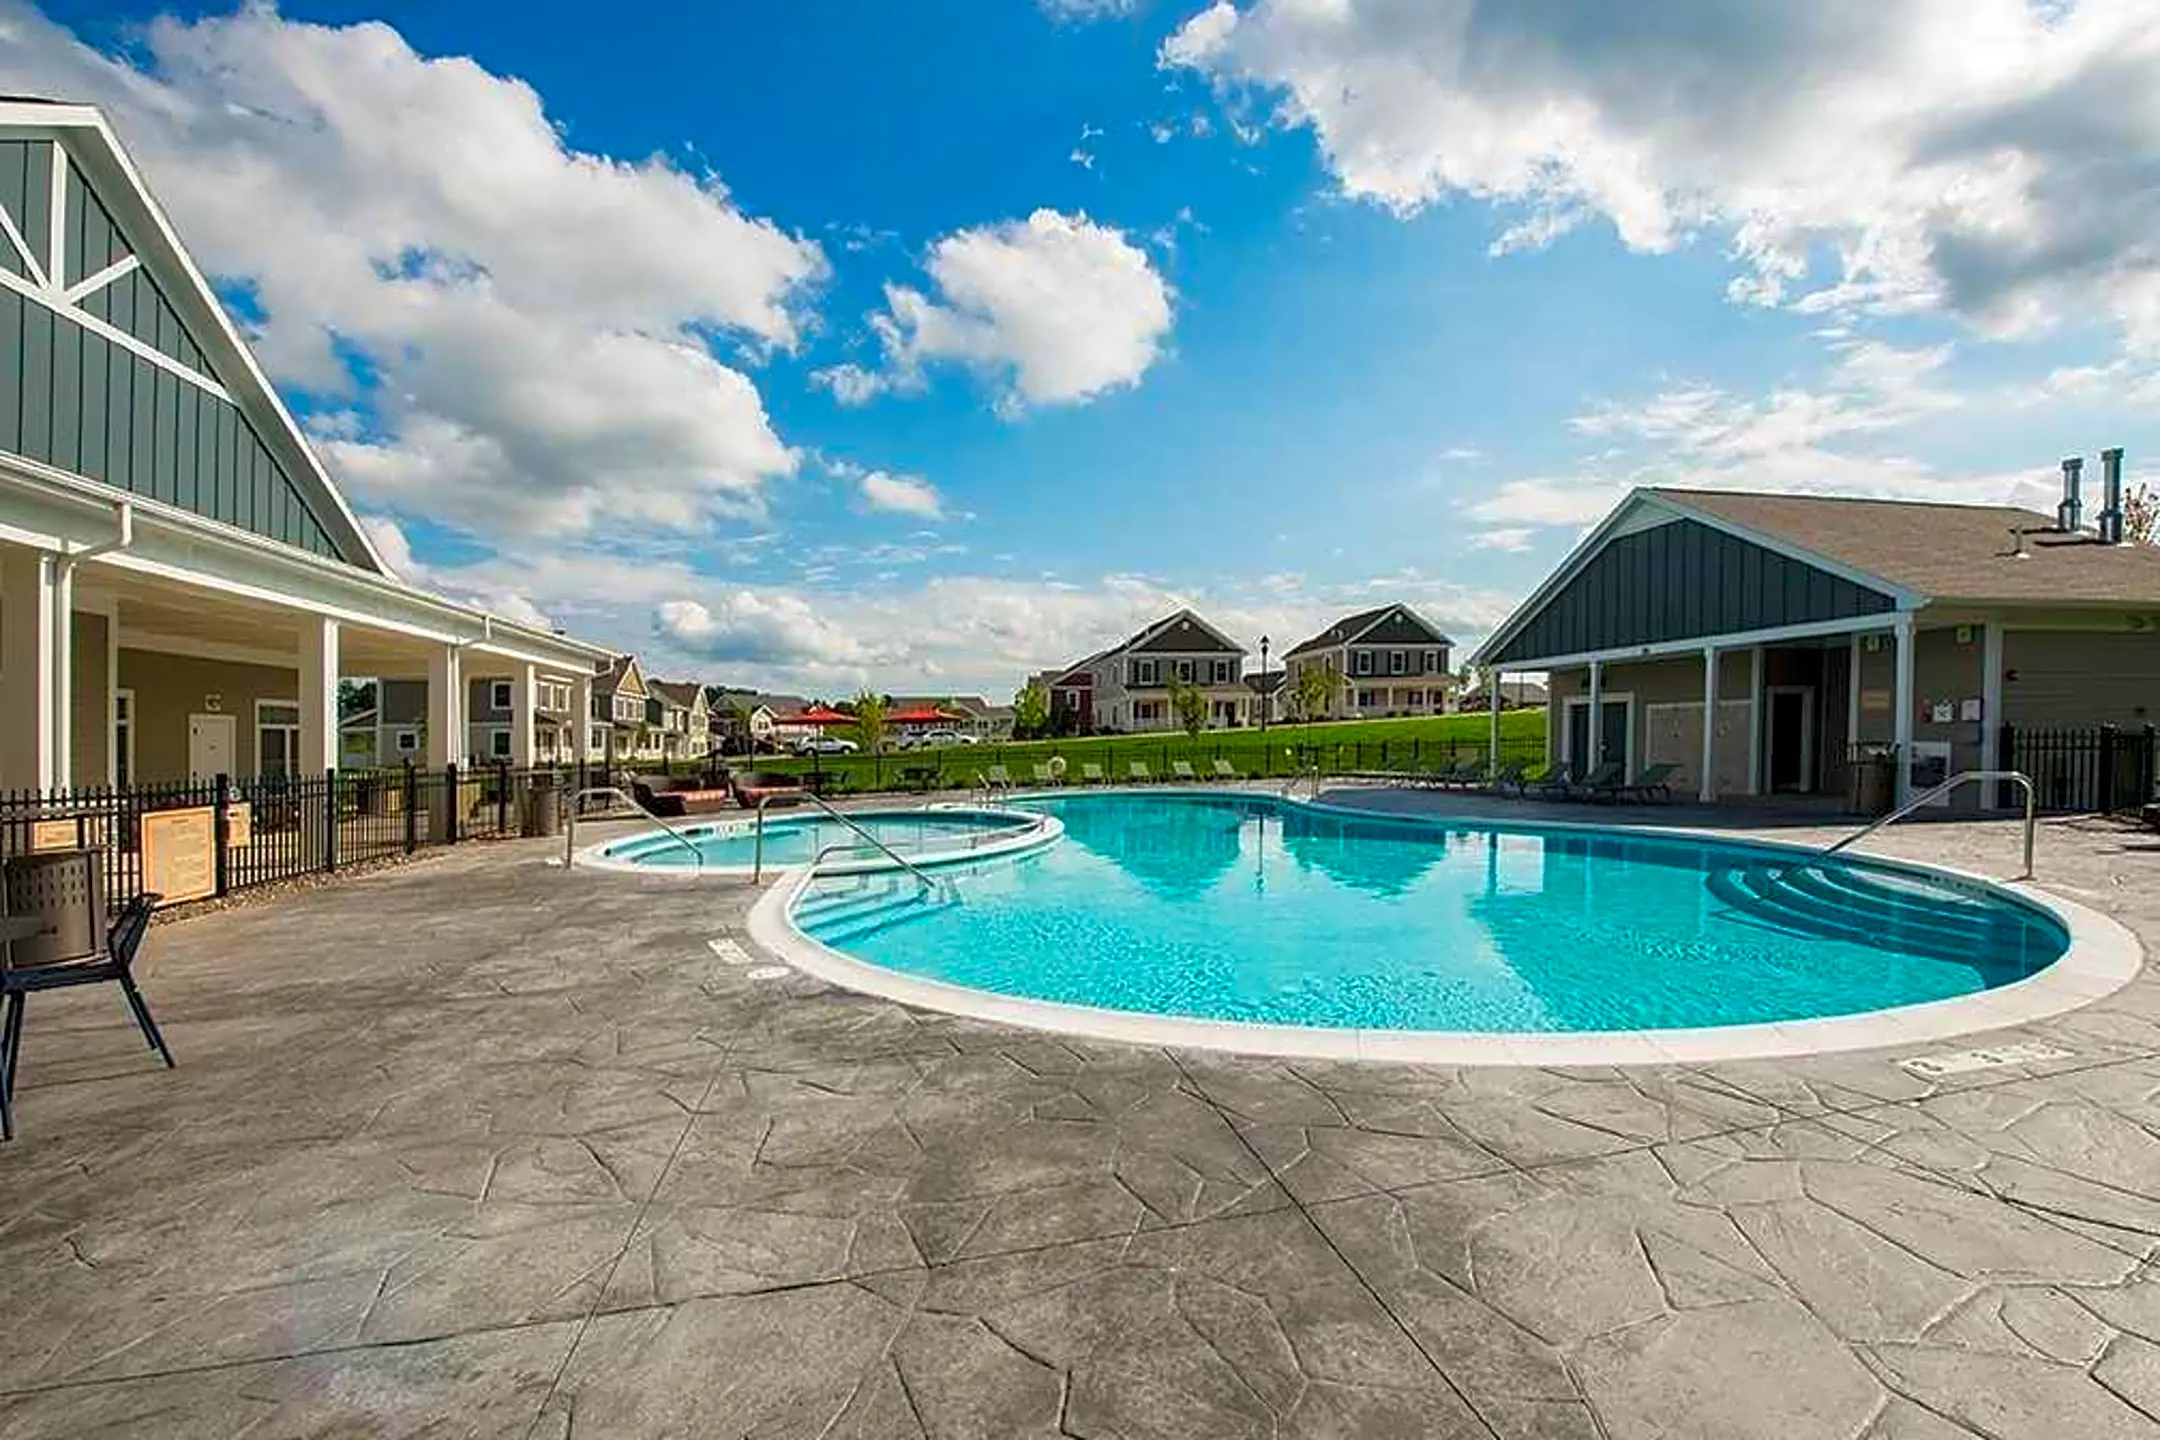 Pool - The Lodge Student Housing - West Henrietta, NY